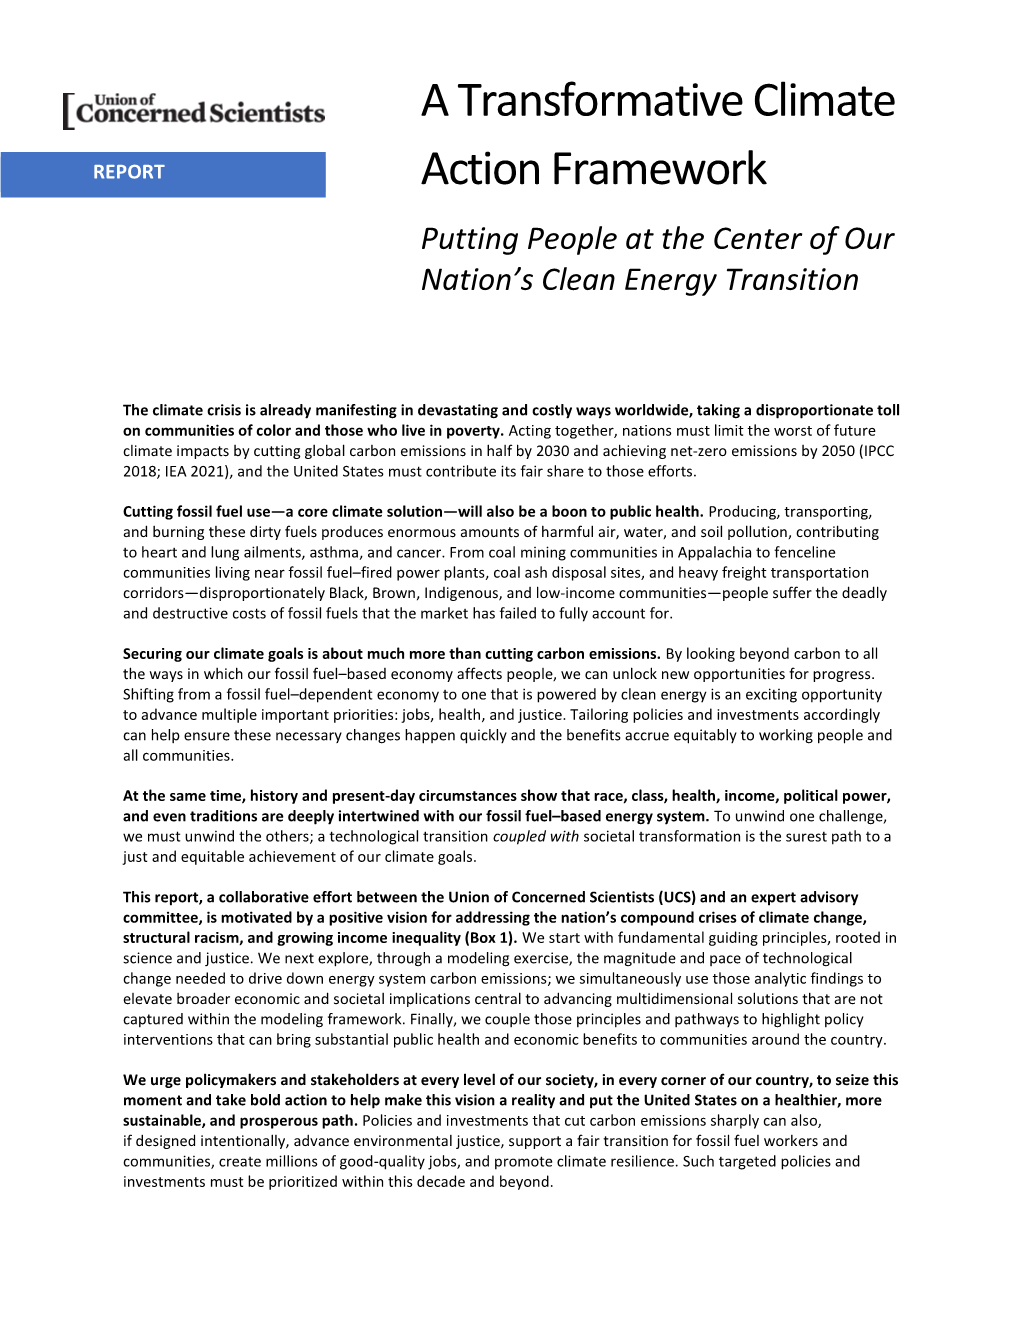 A Transformative Climate Action Framework